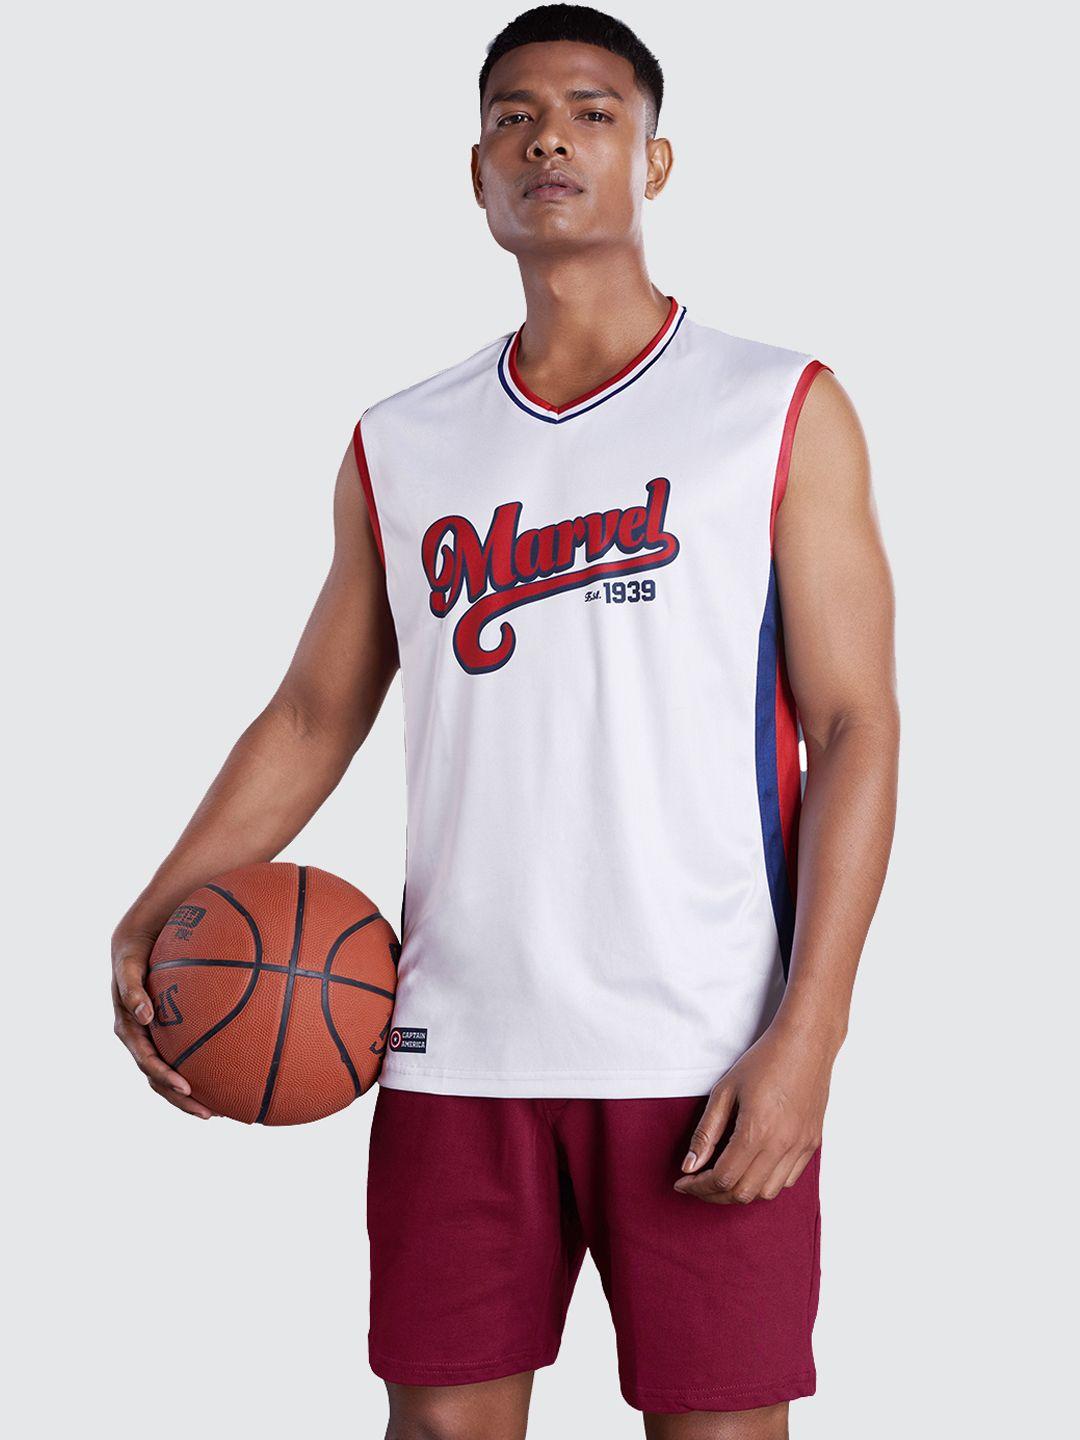 the souled store men white & red captain america basketball printed gym vest